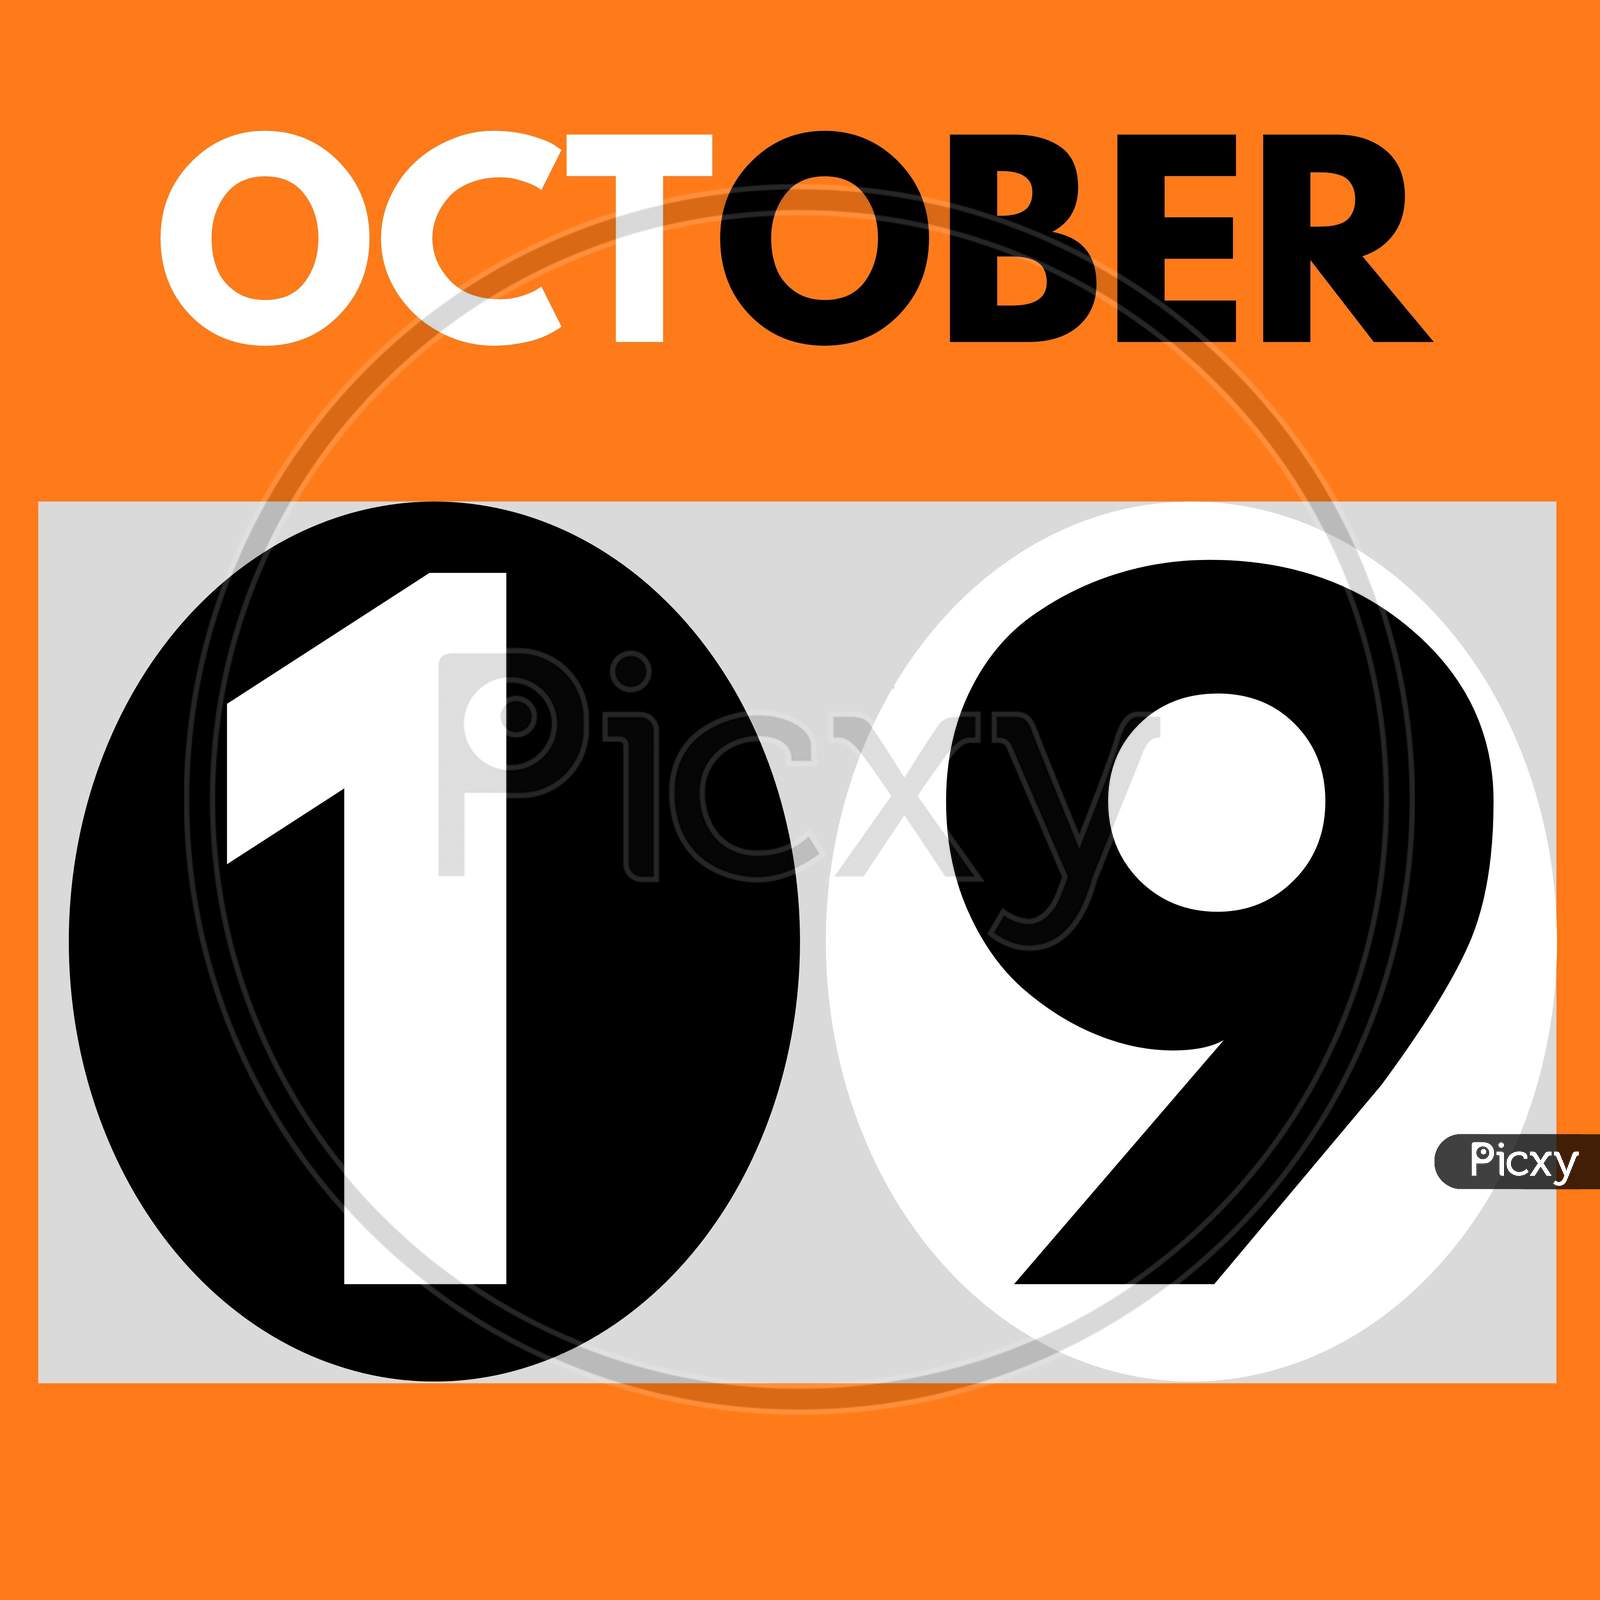 October 19 . Modern Daily Calendar Icon .Date ,Day, Month .Calendar For The Month Of October